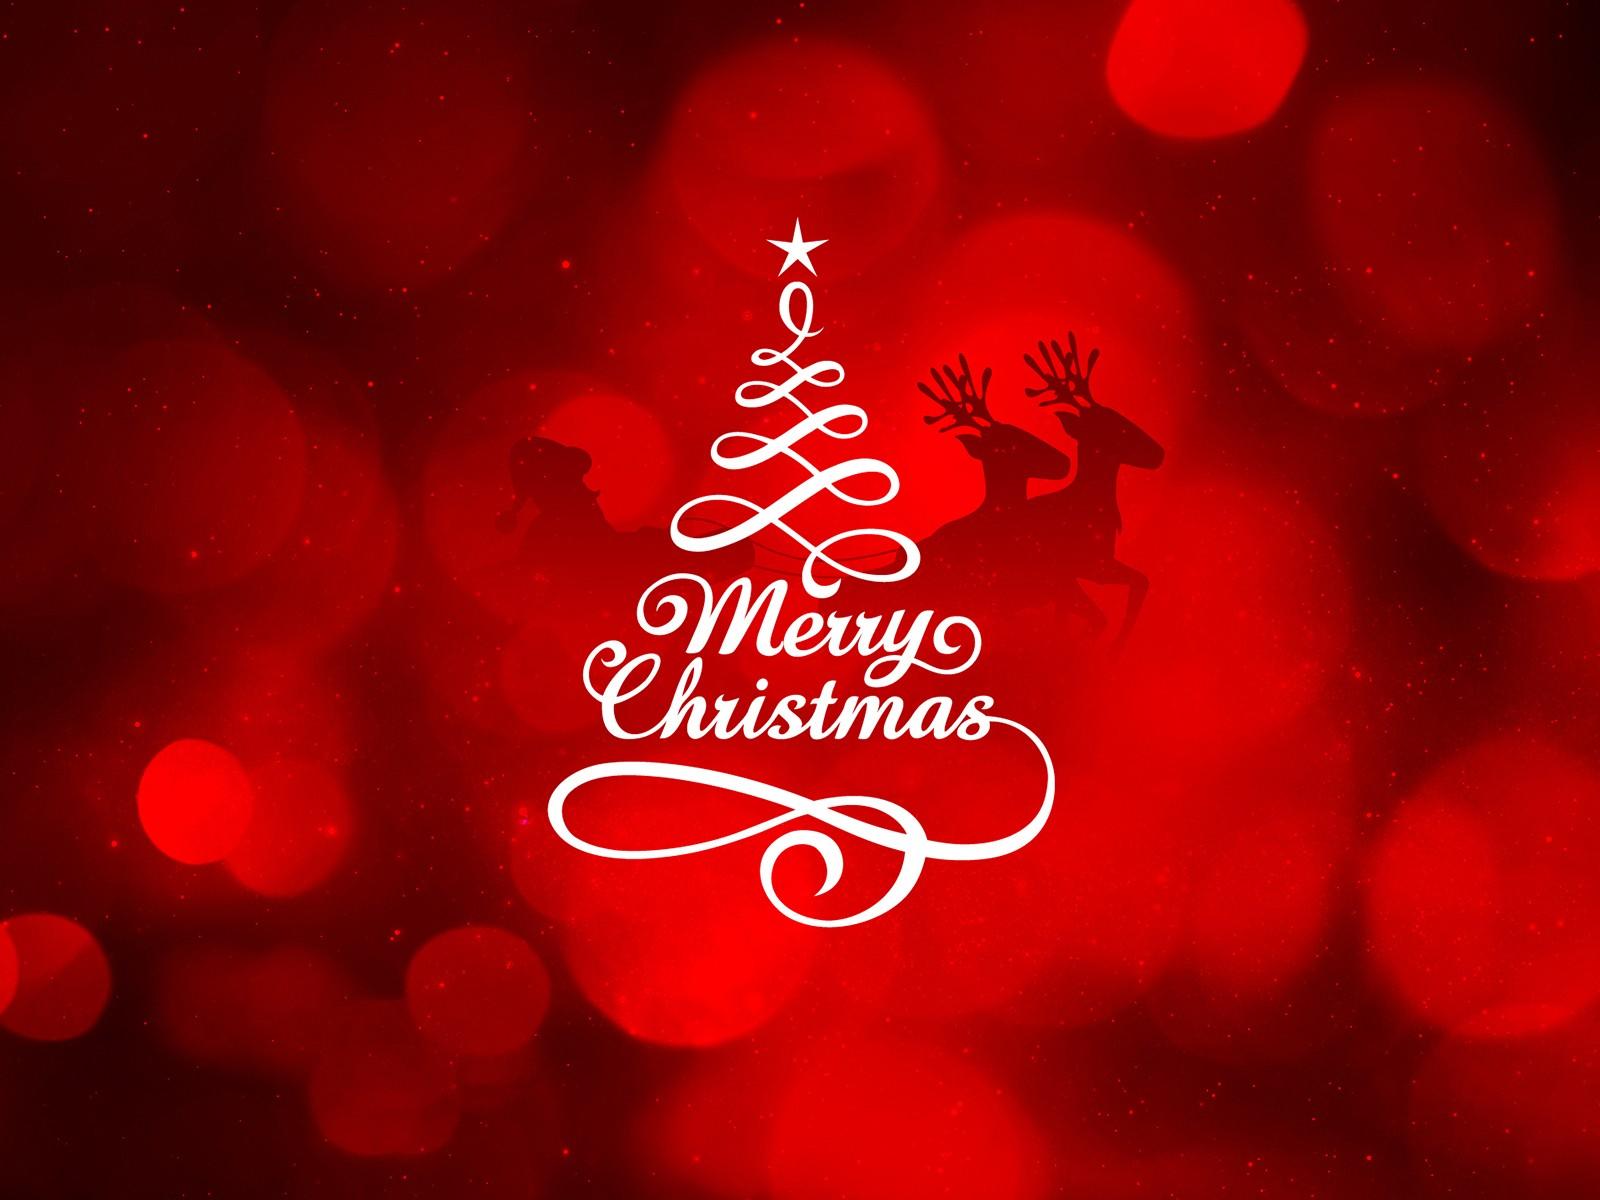 WALLPAPERS HD: Merry Christmas